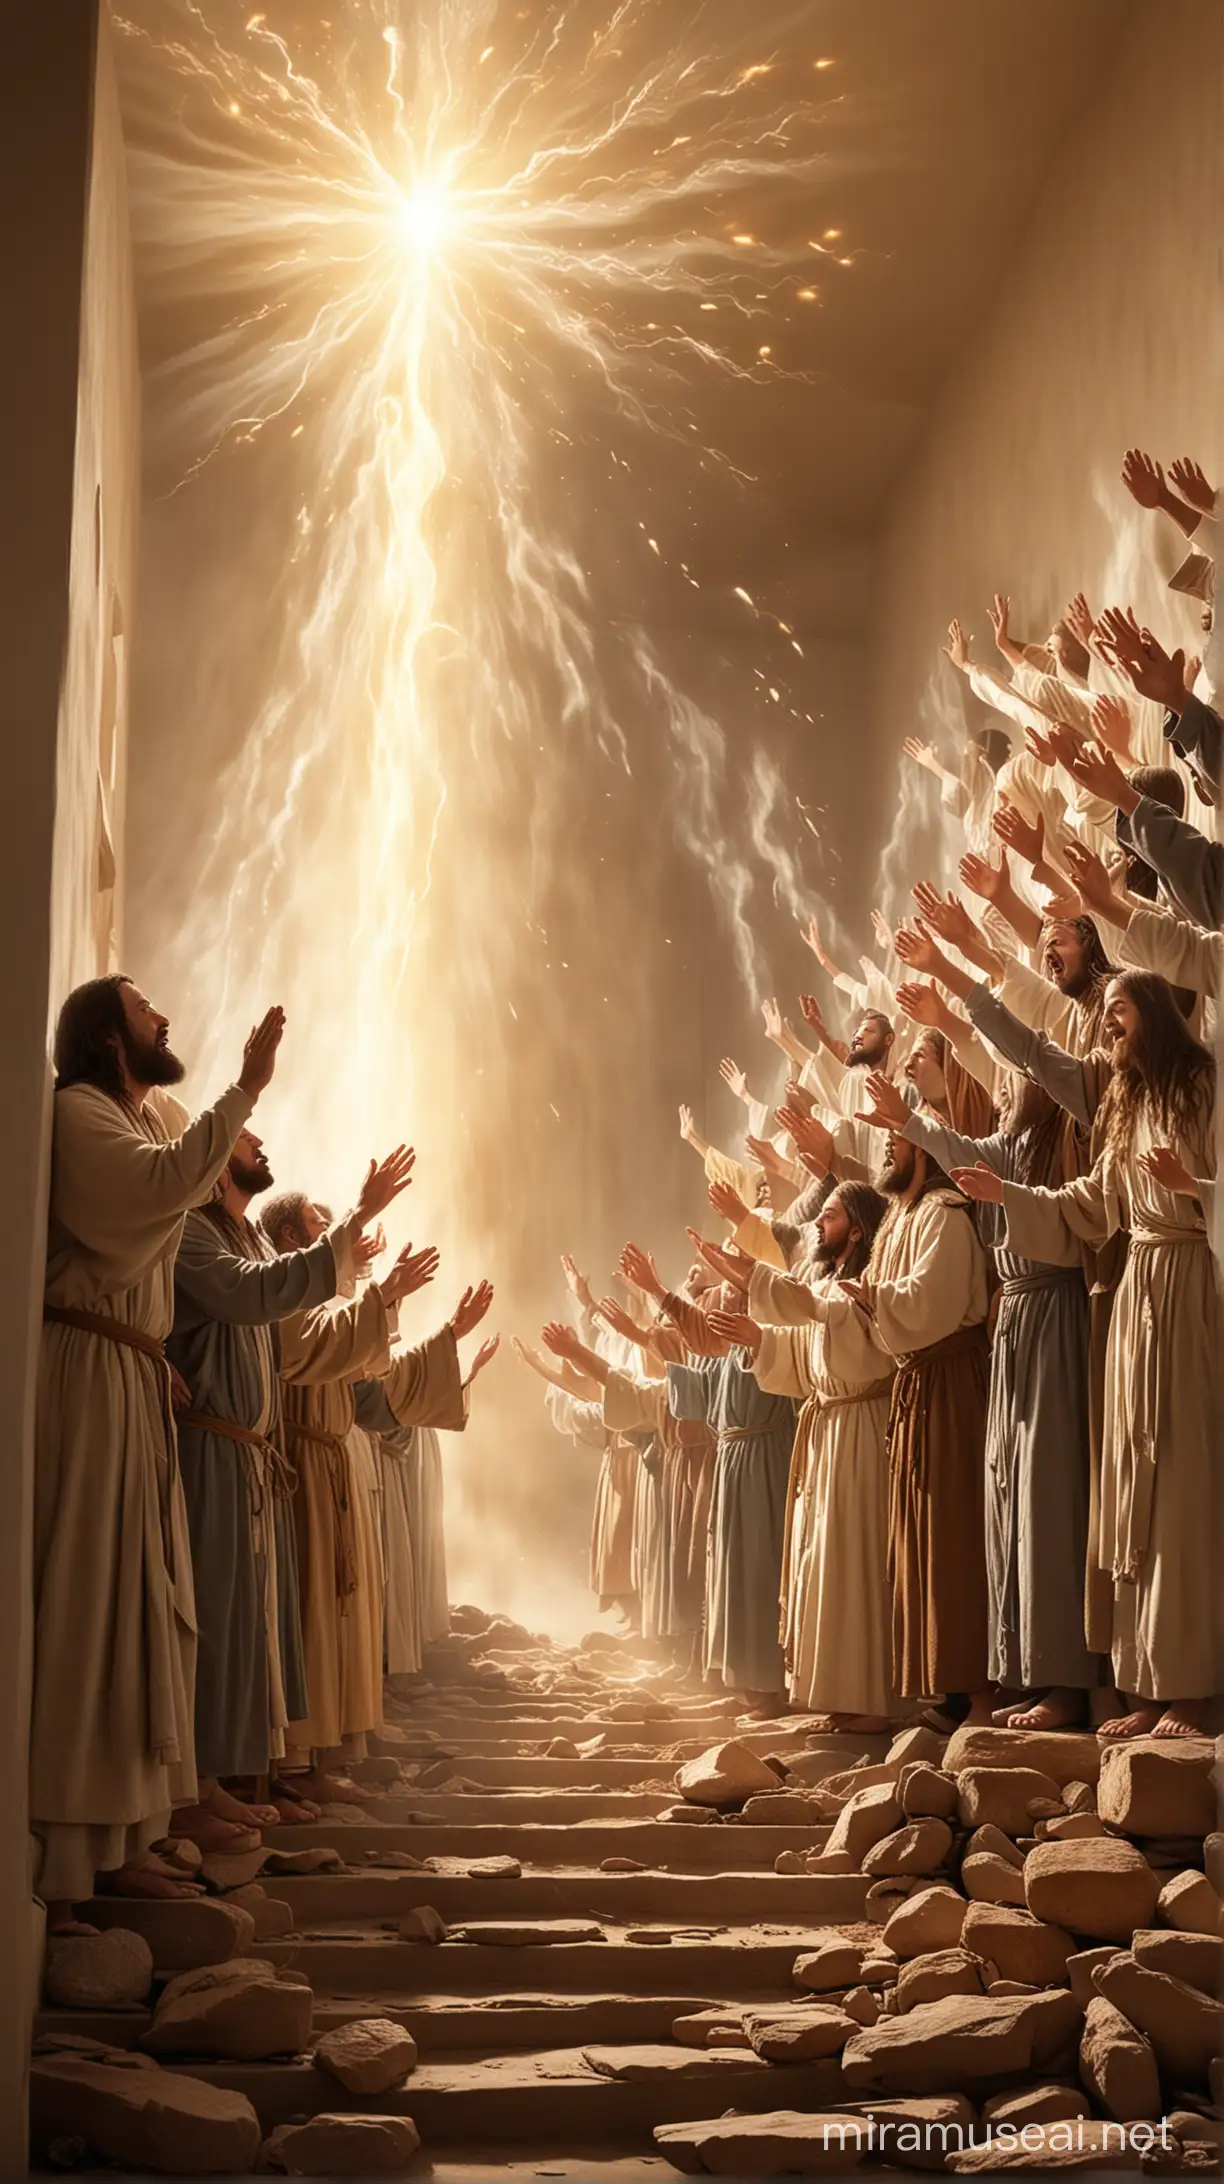 Devout Disciples Praying with Hands Raised in Radiant Light